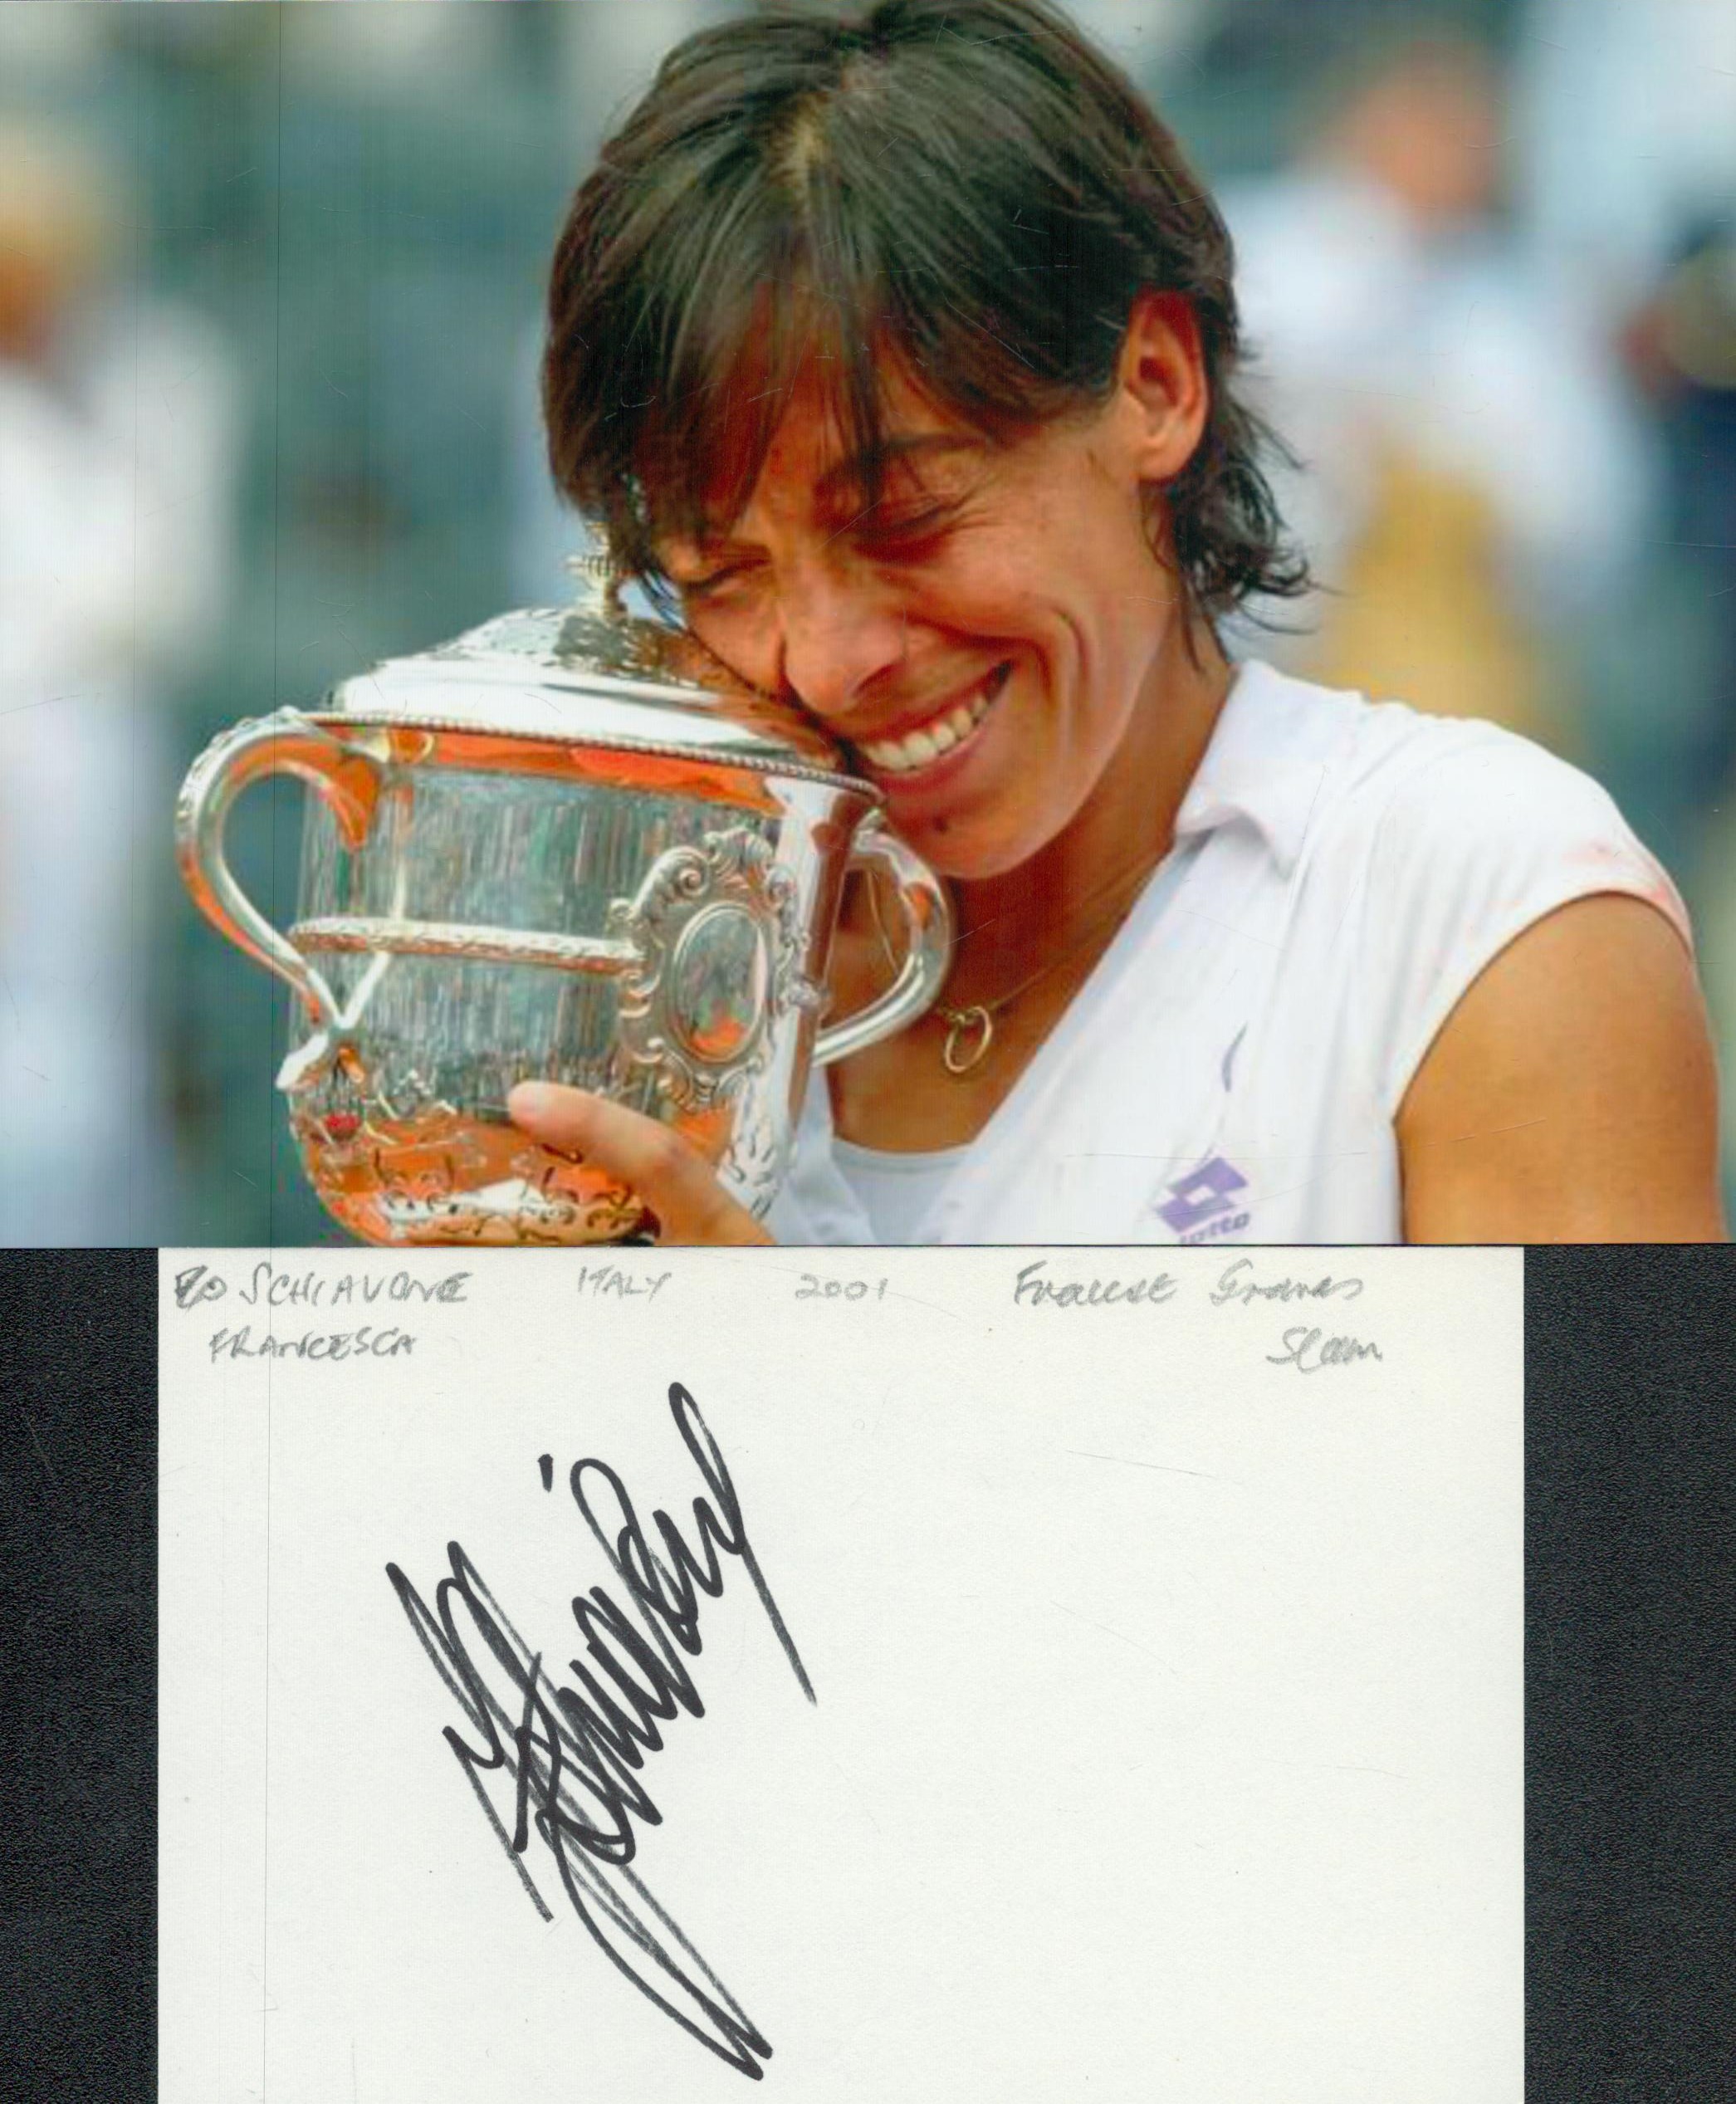 FRANCESCA SCHIAVONE 2010 French Open Winner signed card with Photo . Good Condition. All